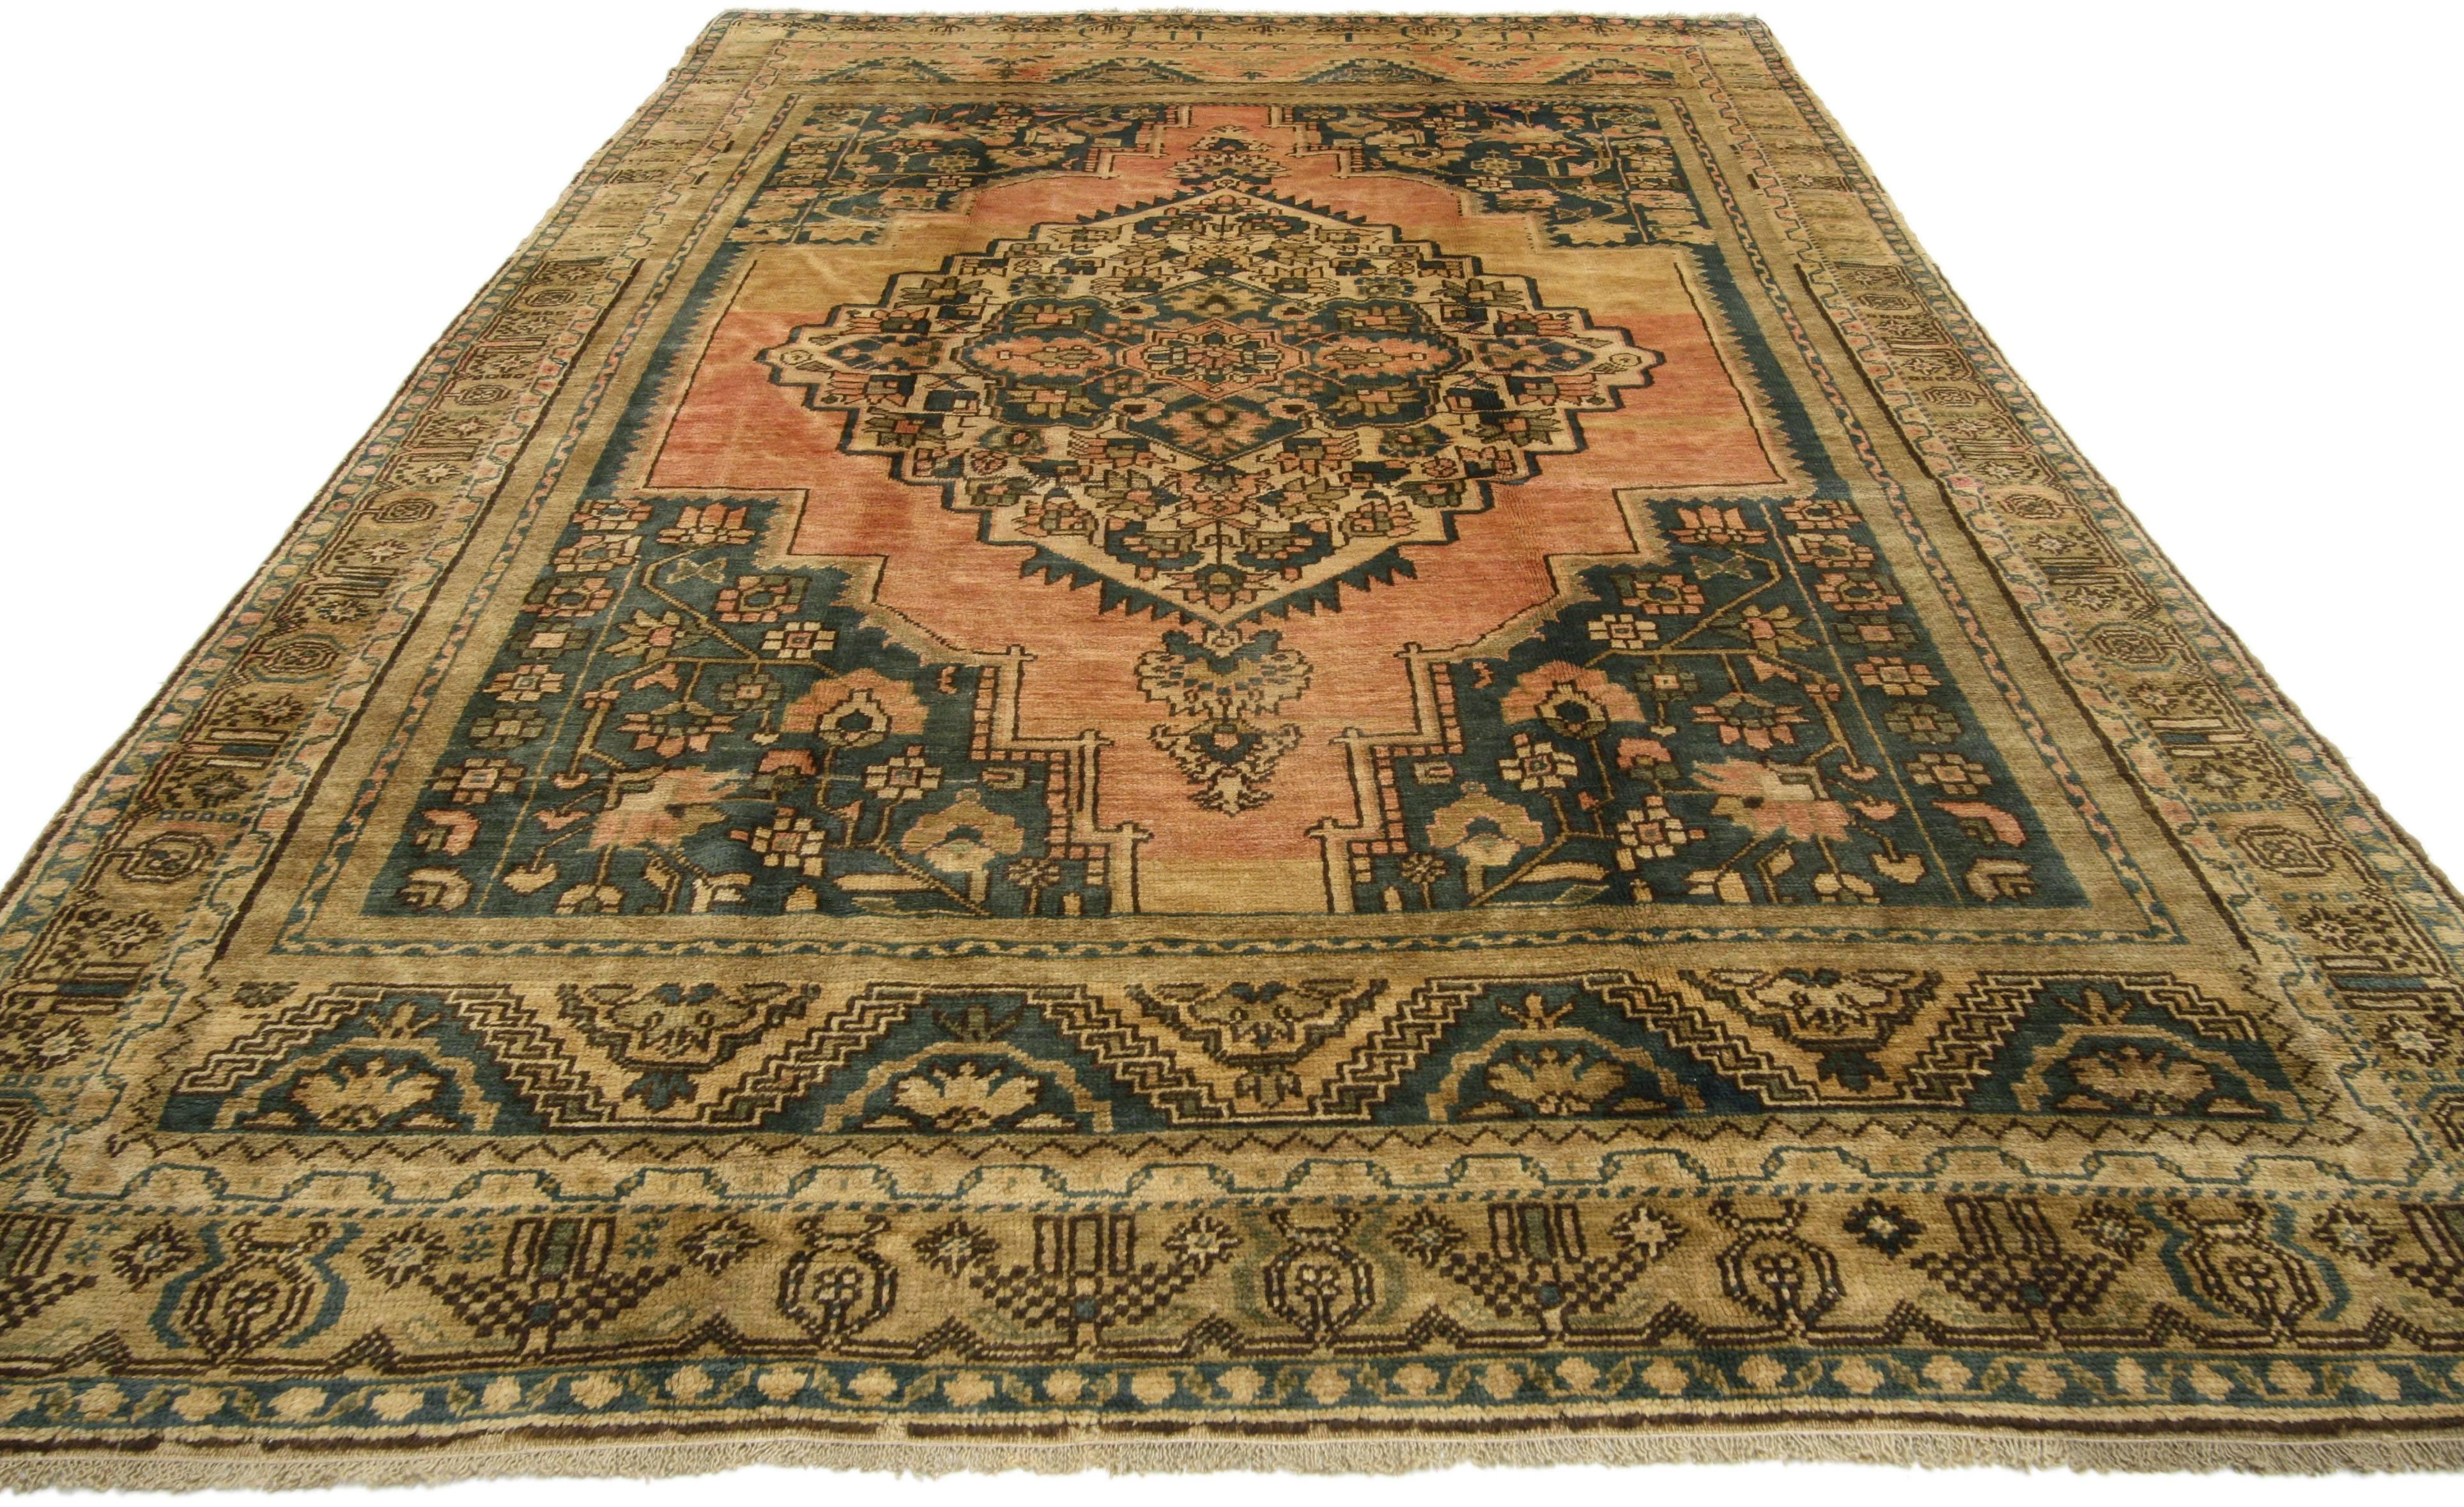 74092, vintage Turkish Oushak rug with traditional style. This hand-knotted wool vintage Turkish Oushak rug features a large-scale center medallion filled with geometric florals in an abrashed pink and ecru field. Cerulean spandrels in each corner